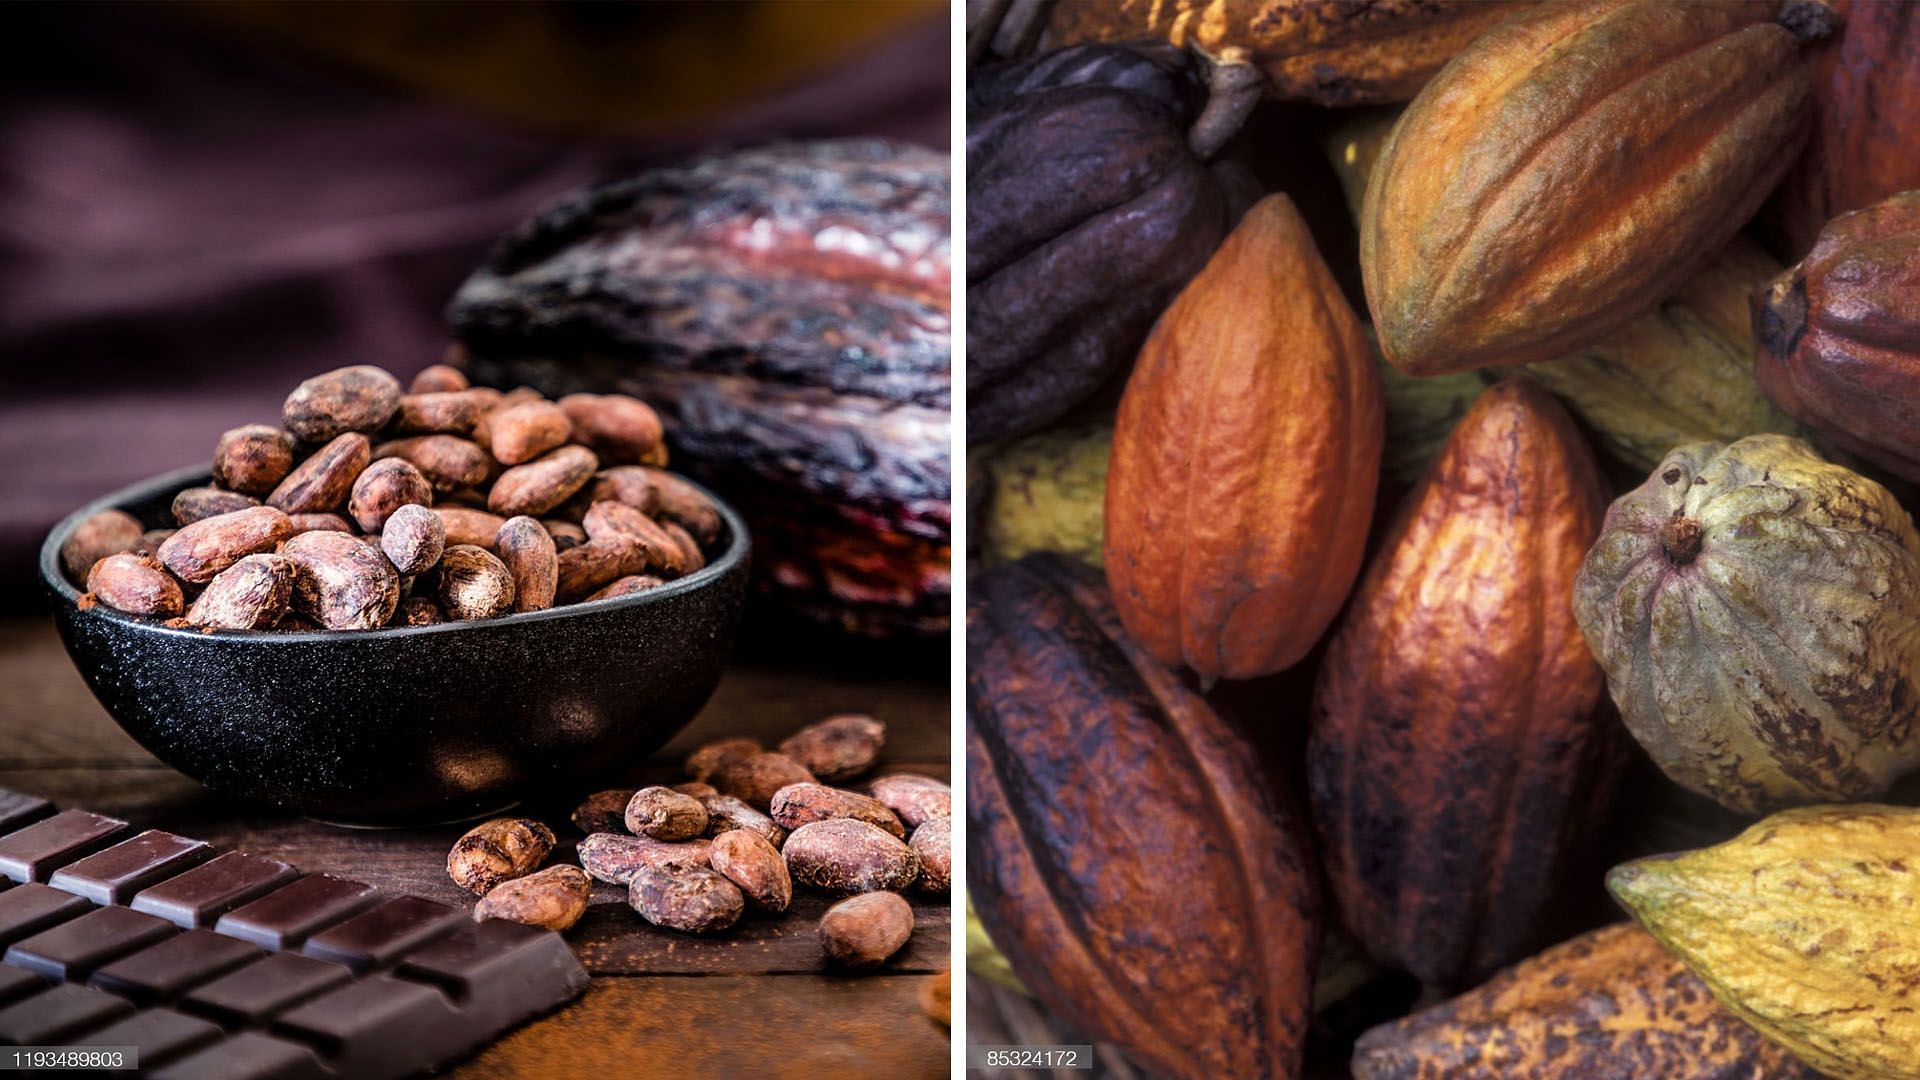 Dark chocolate and cacao bean (image via Getty Images)